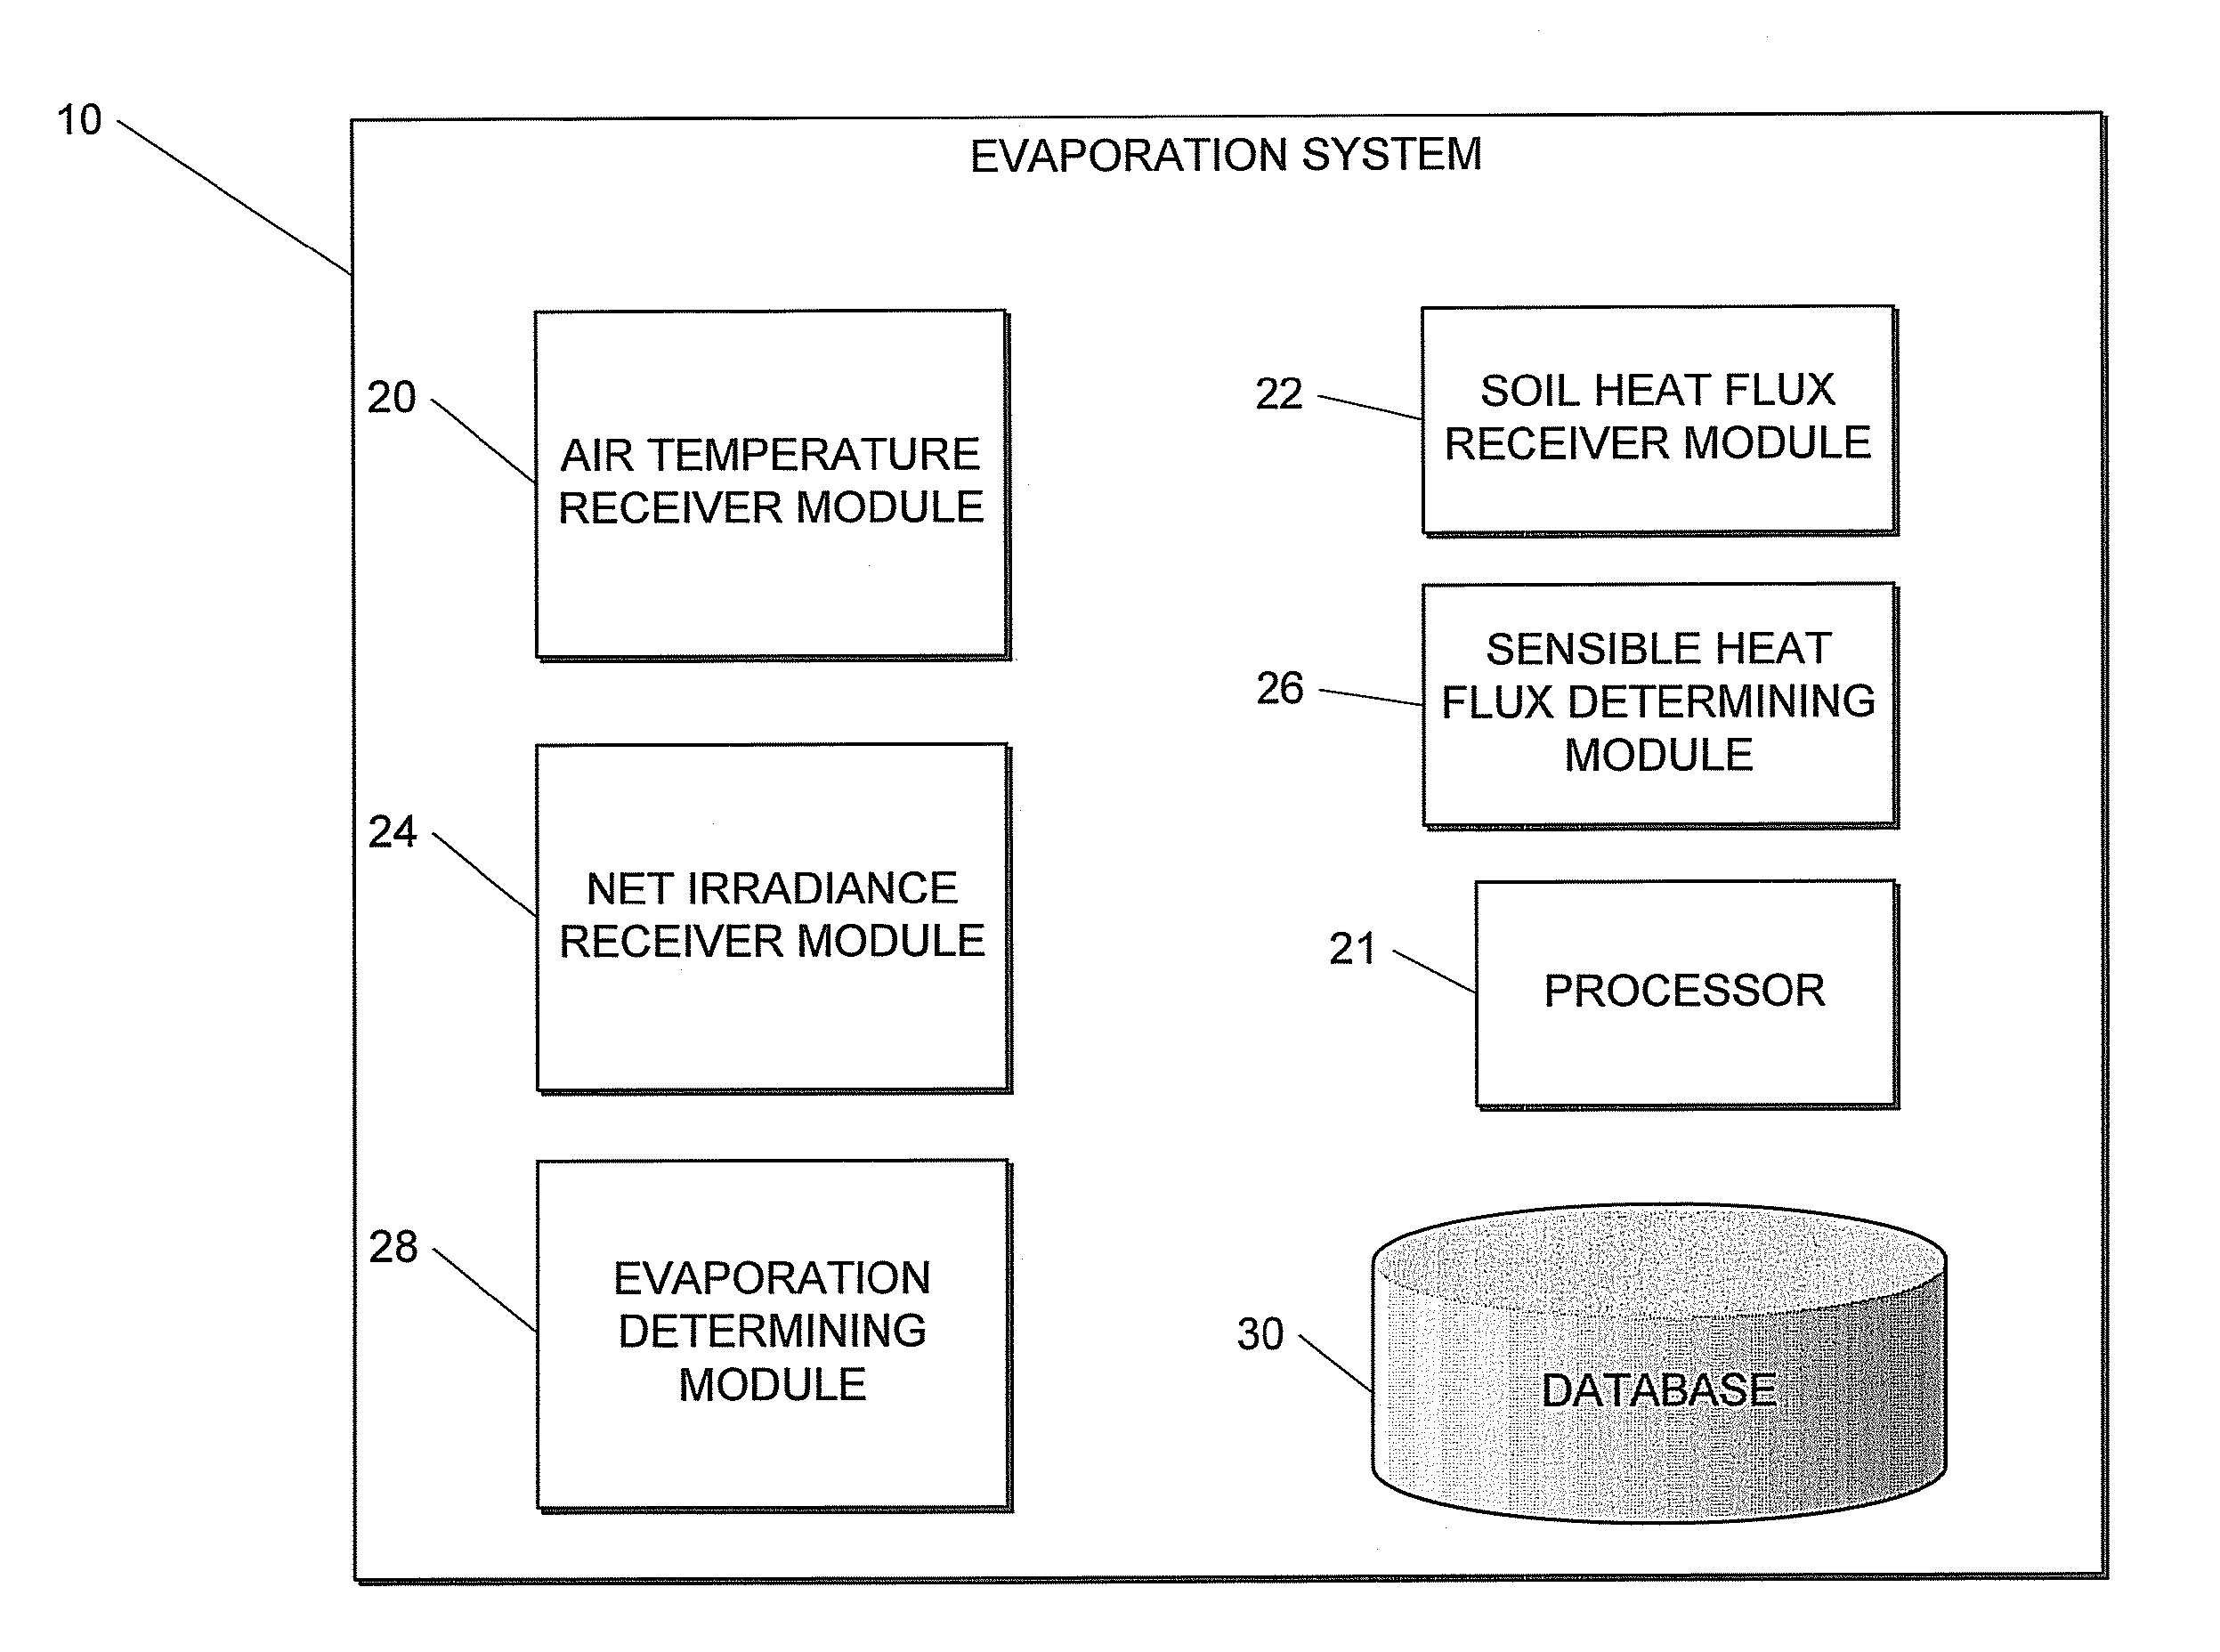 Method and system for estimating evaporation representative of an area